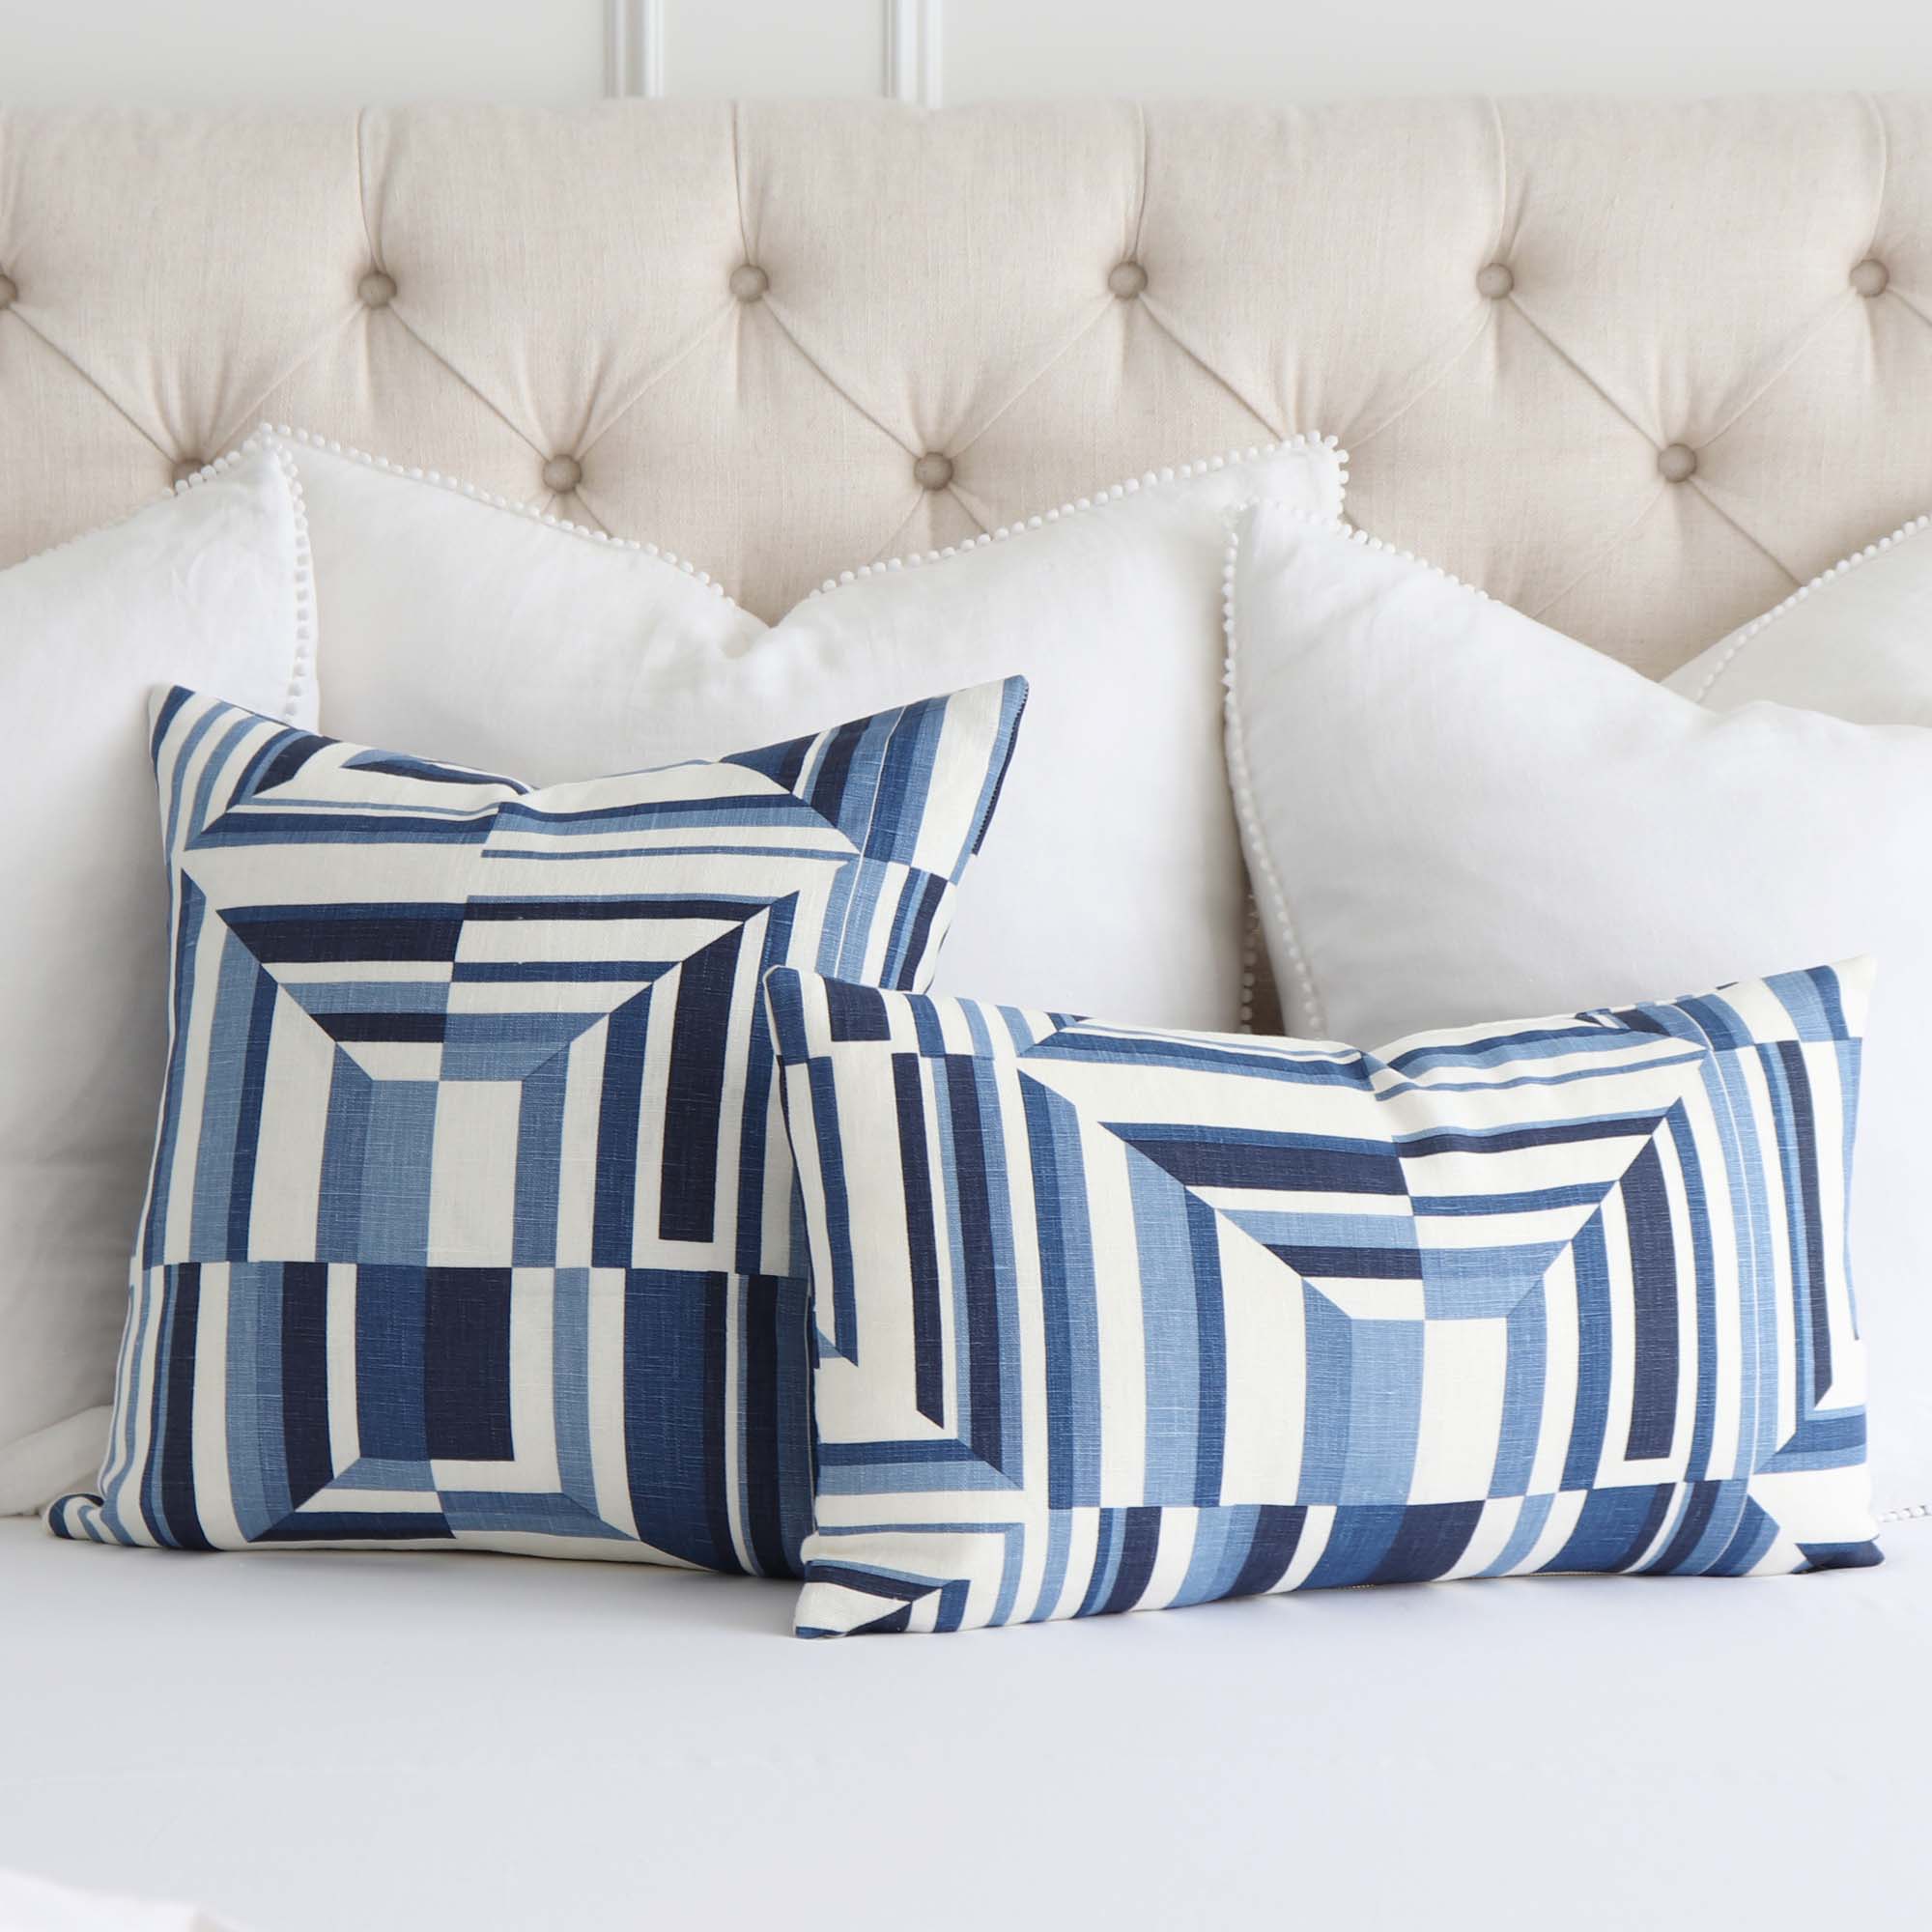 https://www.chloeandolive.com/cdn/shop/products/Thibaut-Cubism-Geometric-Blue-White-Stripes-Linen-Designer-Luxury-Decorative-Throw-Pillow-Cover-on-Queen-Bed-with-Big-White-Euro-Shams_5000x.jpg?v=1660332637